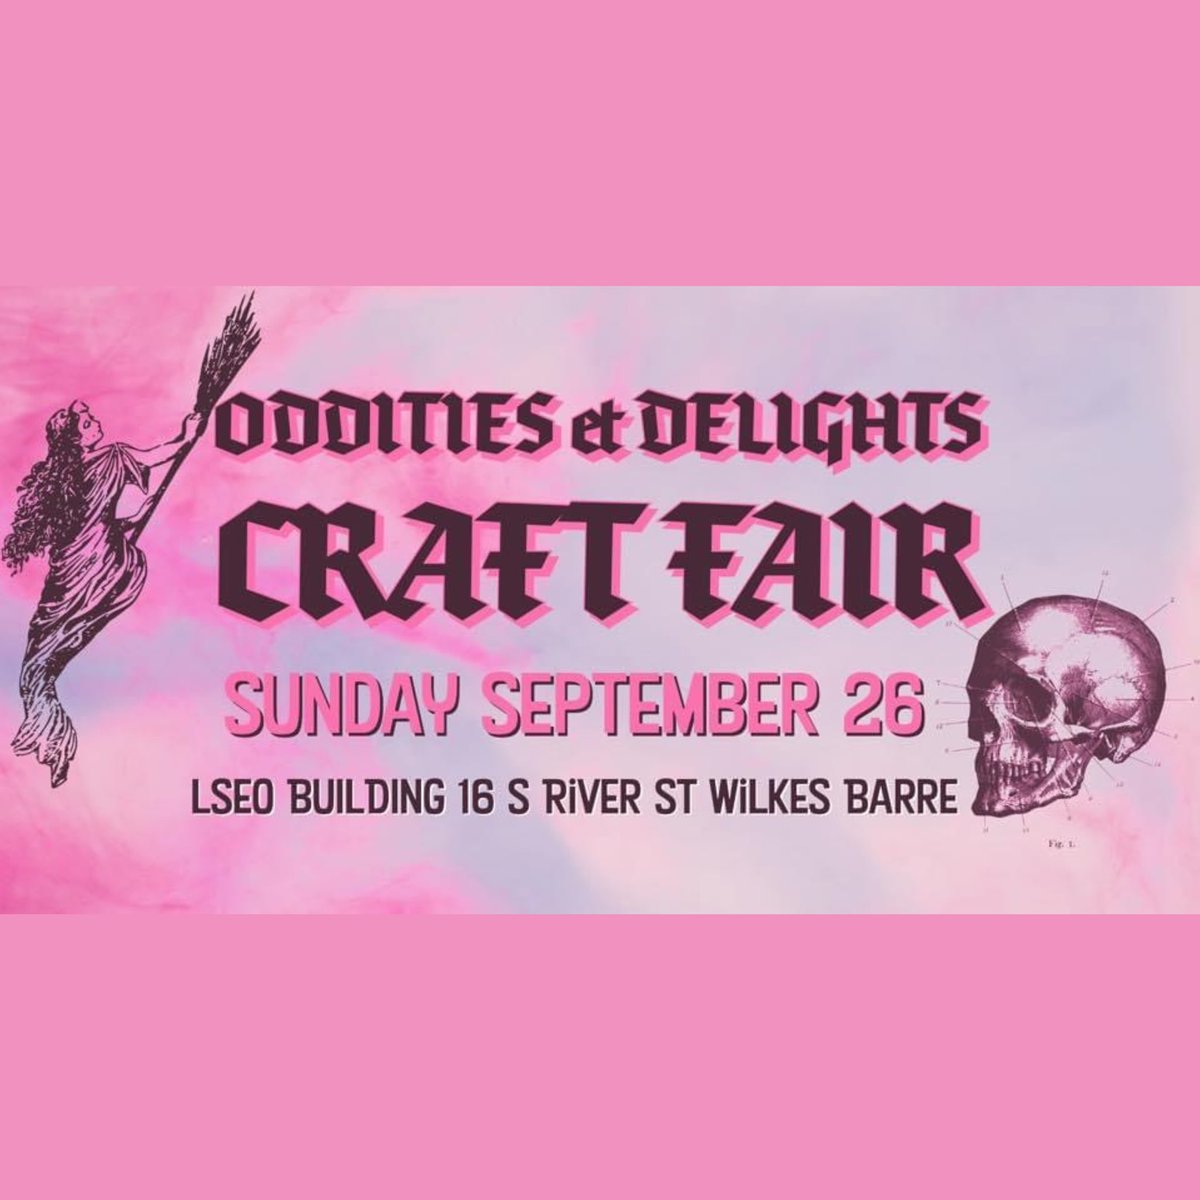 ✨ WILKES BARRE, PA! ✨ I’ll be vending at the NEPA Craft Works x The Strange and Unusual event: Oddities and Delights Craft Fair on Sunday, September 26th. If you’re in the area come check out this event and get some of my NEW items!